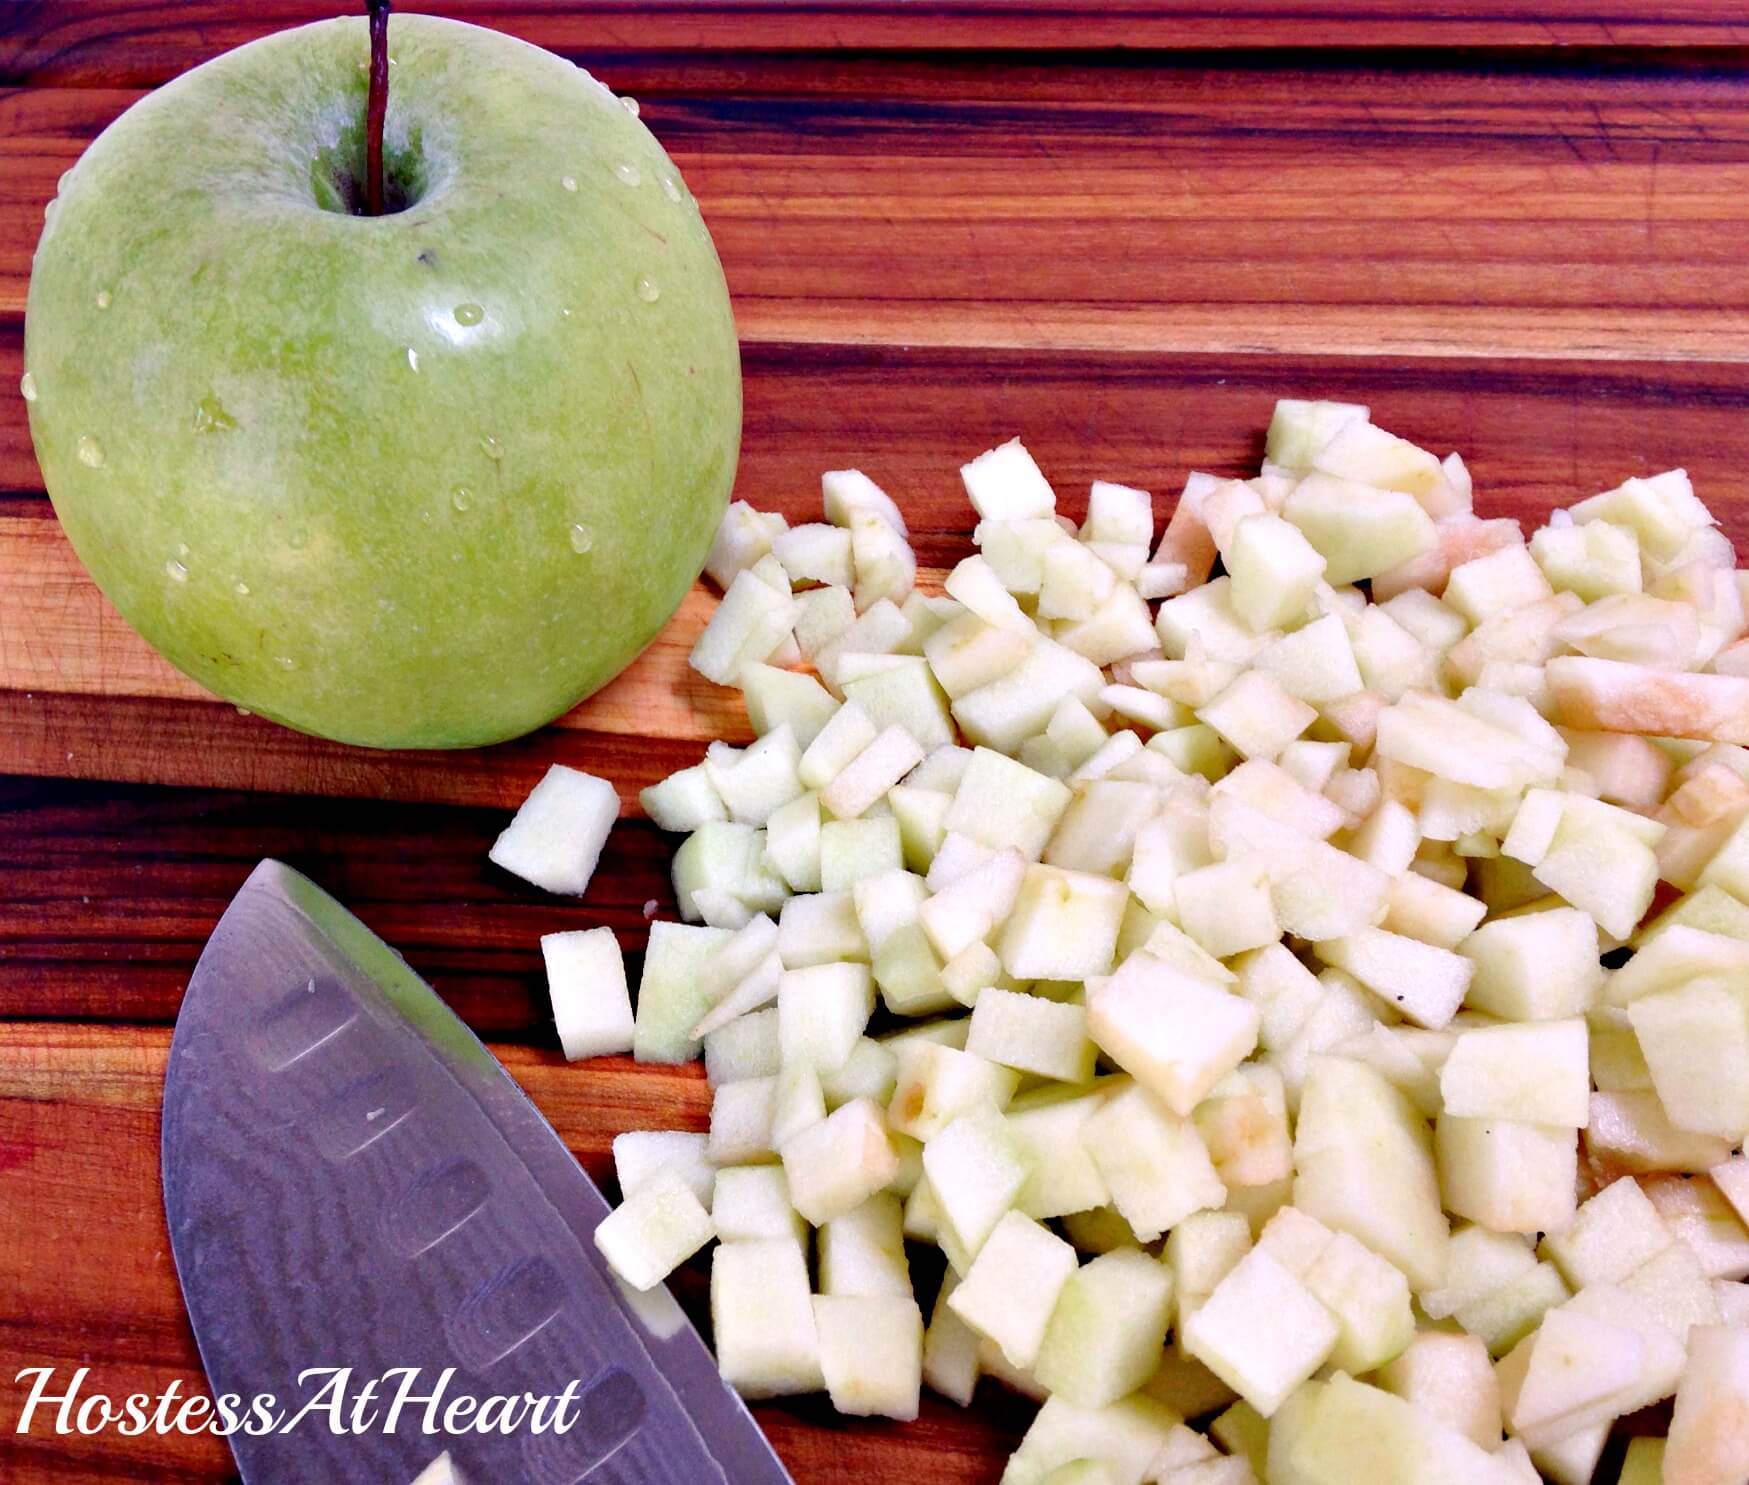 A diced green apples and a knife sit next to a green apple.